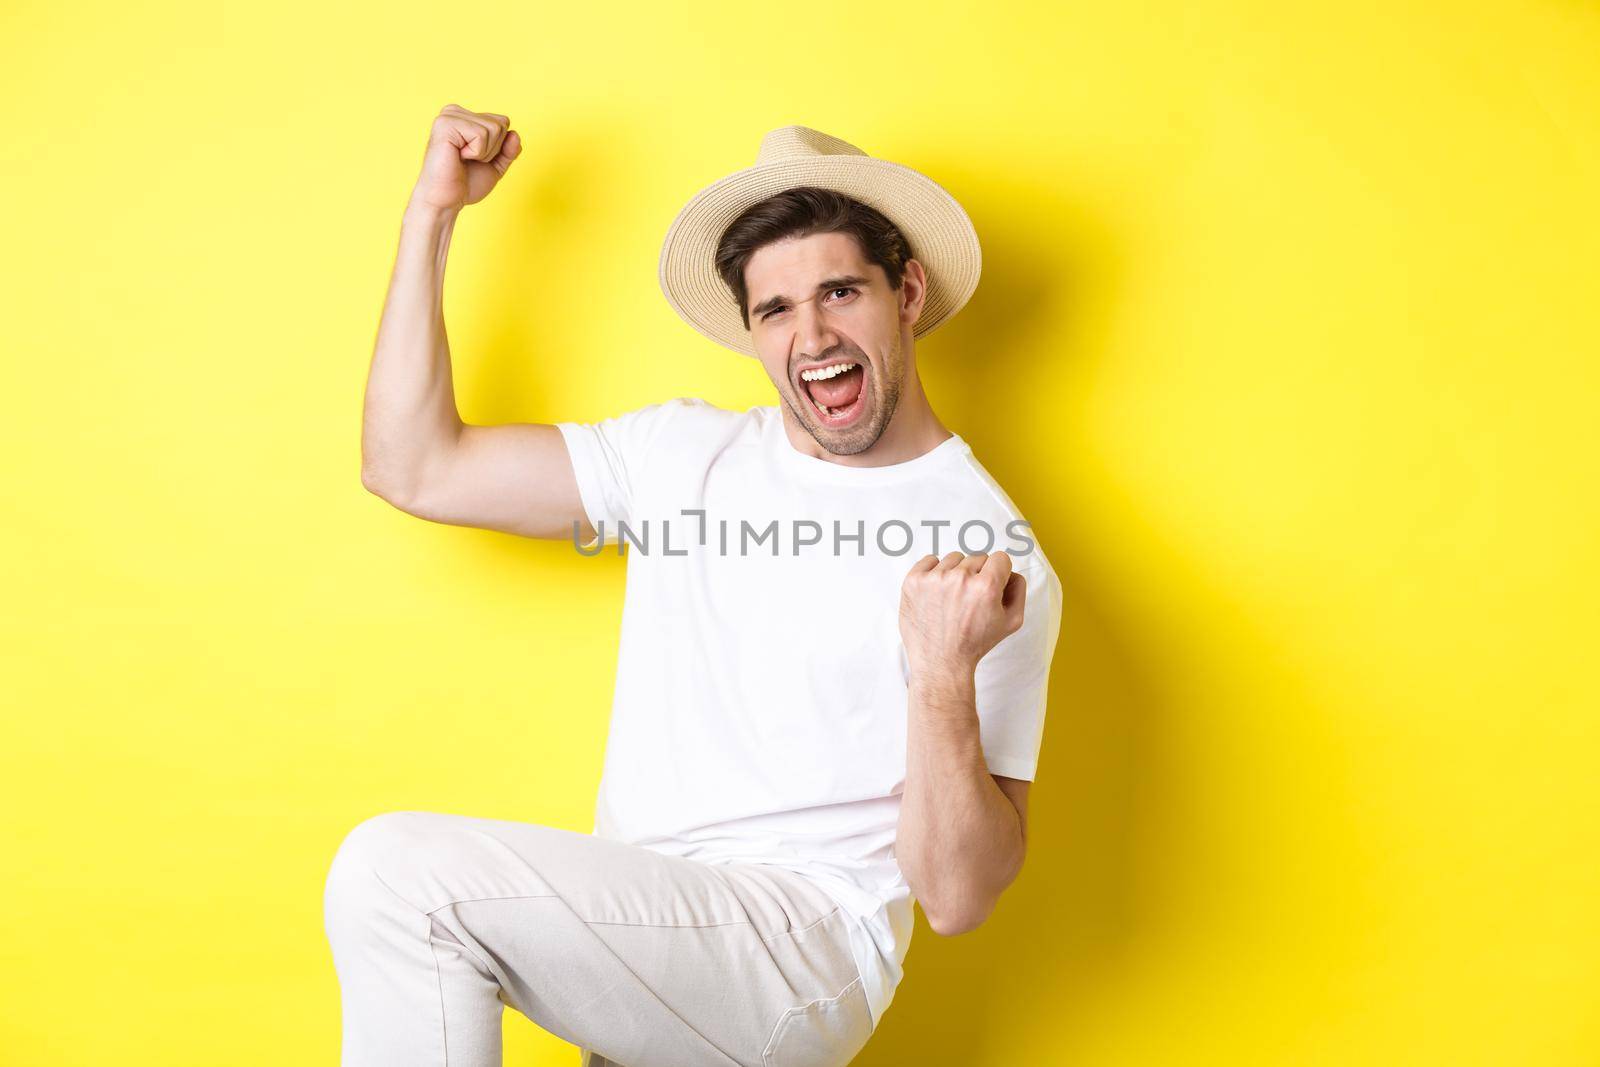 Concept of tourism and vacation. Lucky male tourist winning trip, rejoicing and saying yes, making fist pump while triumphing, standing against yellow background.